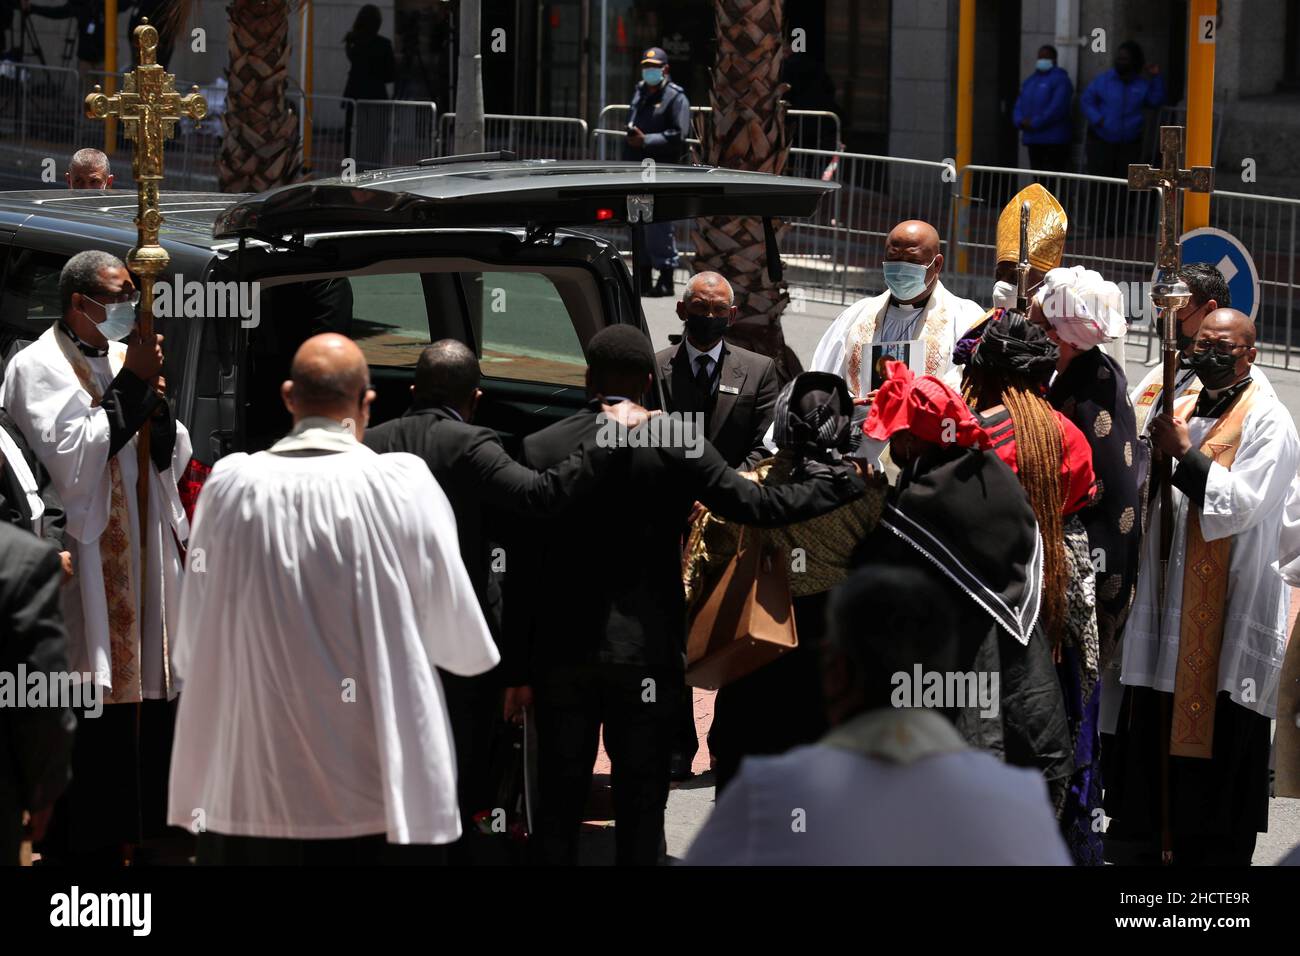 People and members of the clergy gather near the hearse carrying the casket holding the body of Archbishop Desmond Tutu after his funeral service at St George's Cathedral in Cape Town, South Africa, January 1, 2022. REUTERS/Mike Hutchings Stock Photo